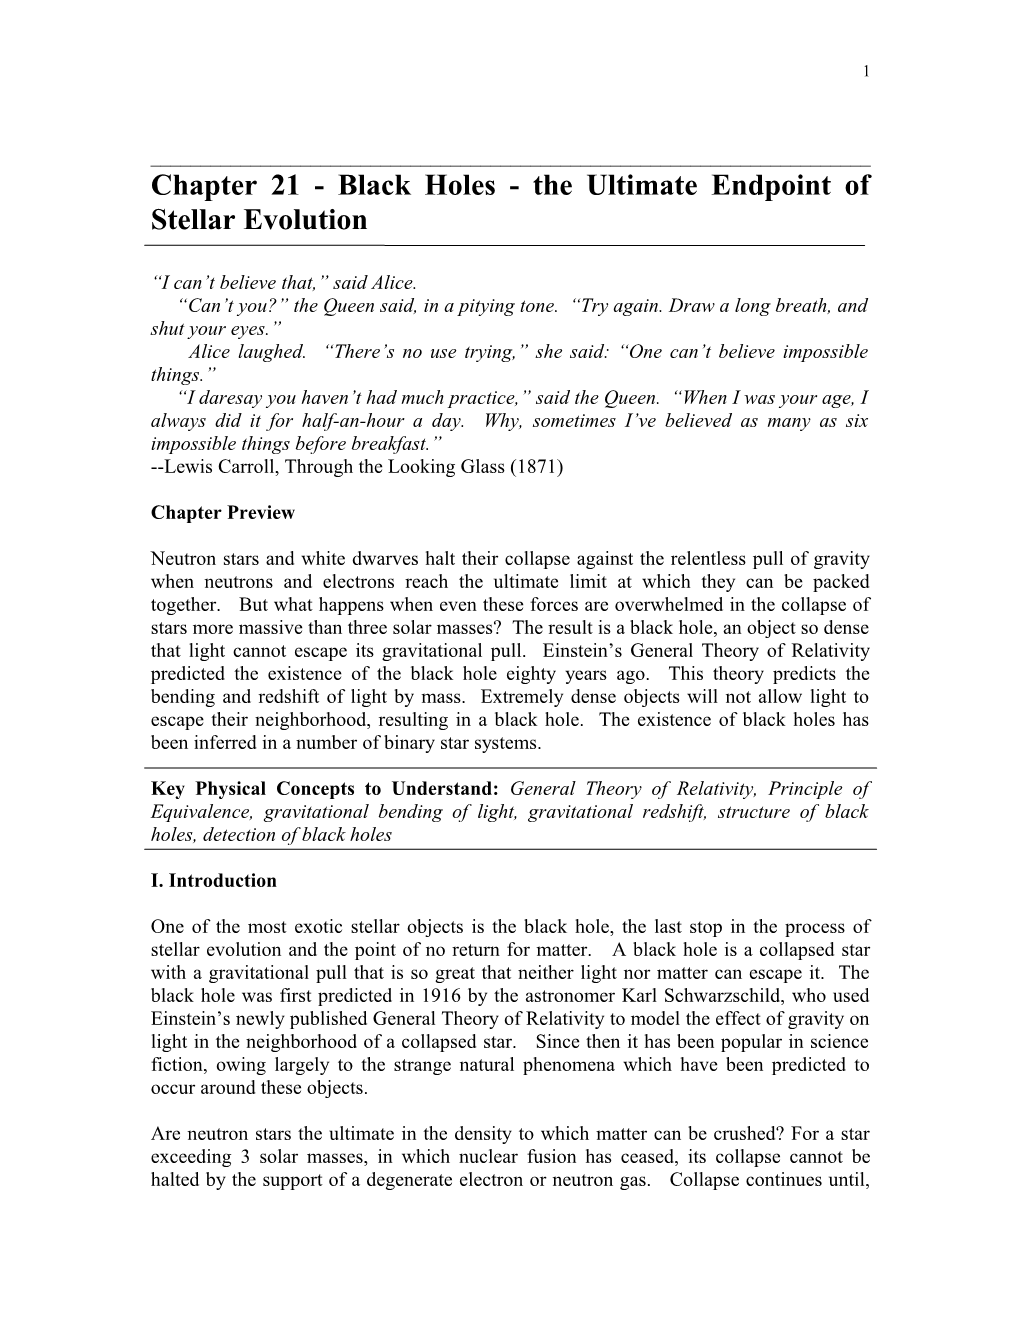 Chapter 21 - Black Holes - the Ultimate Endpoint of Stellar Evolution